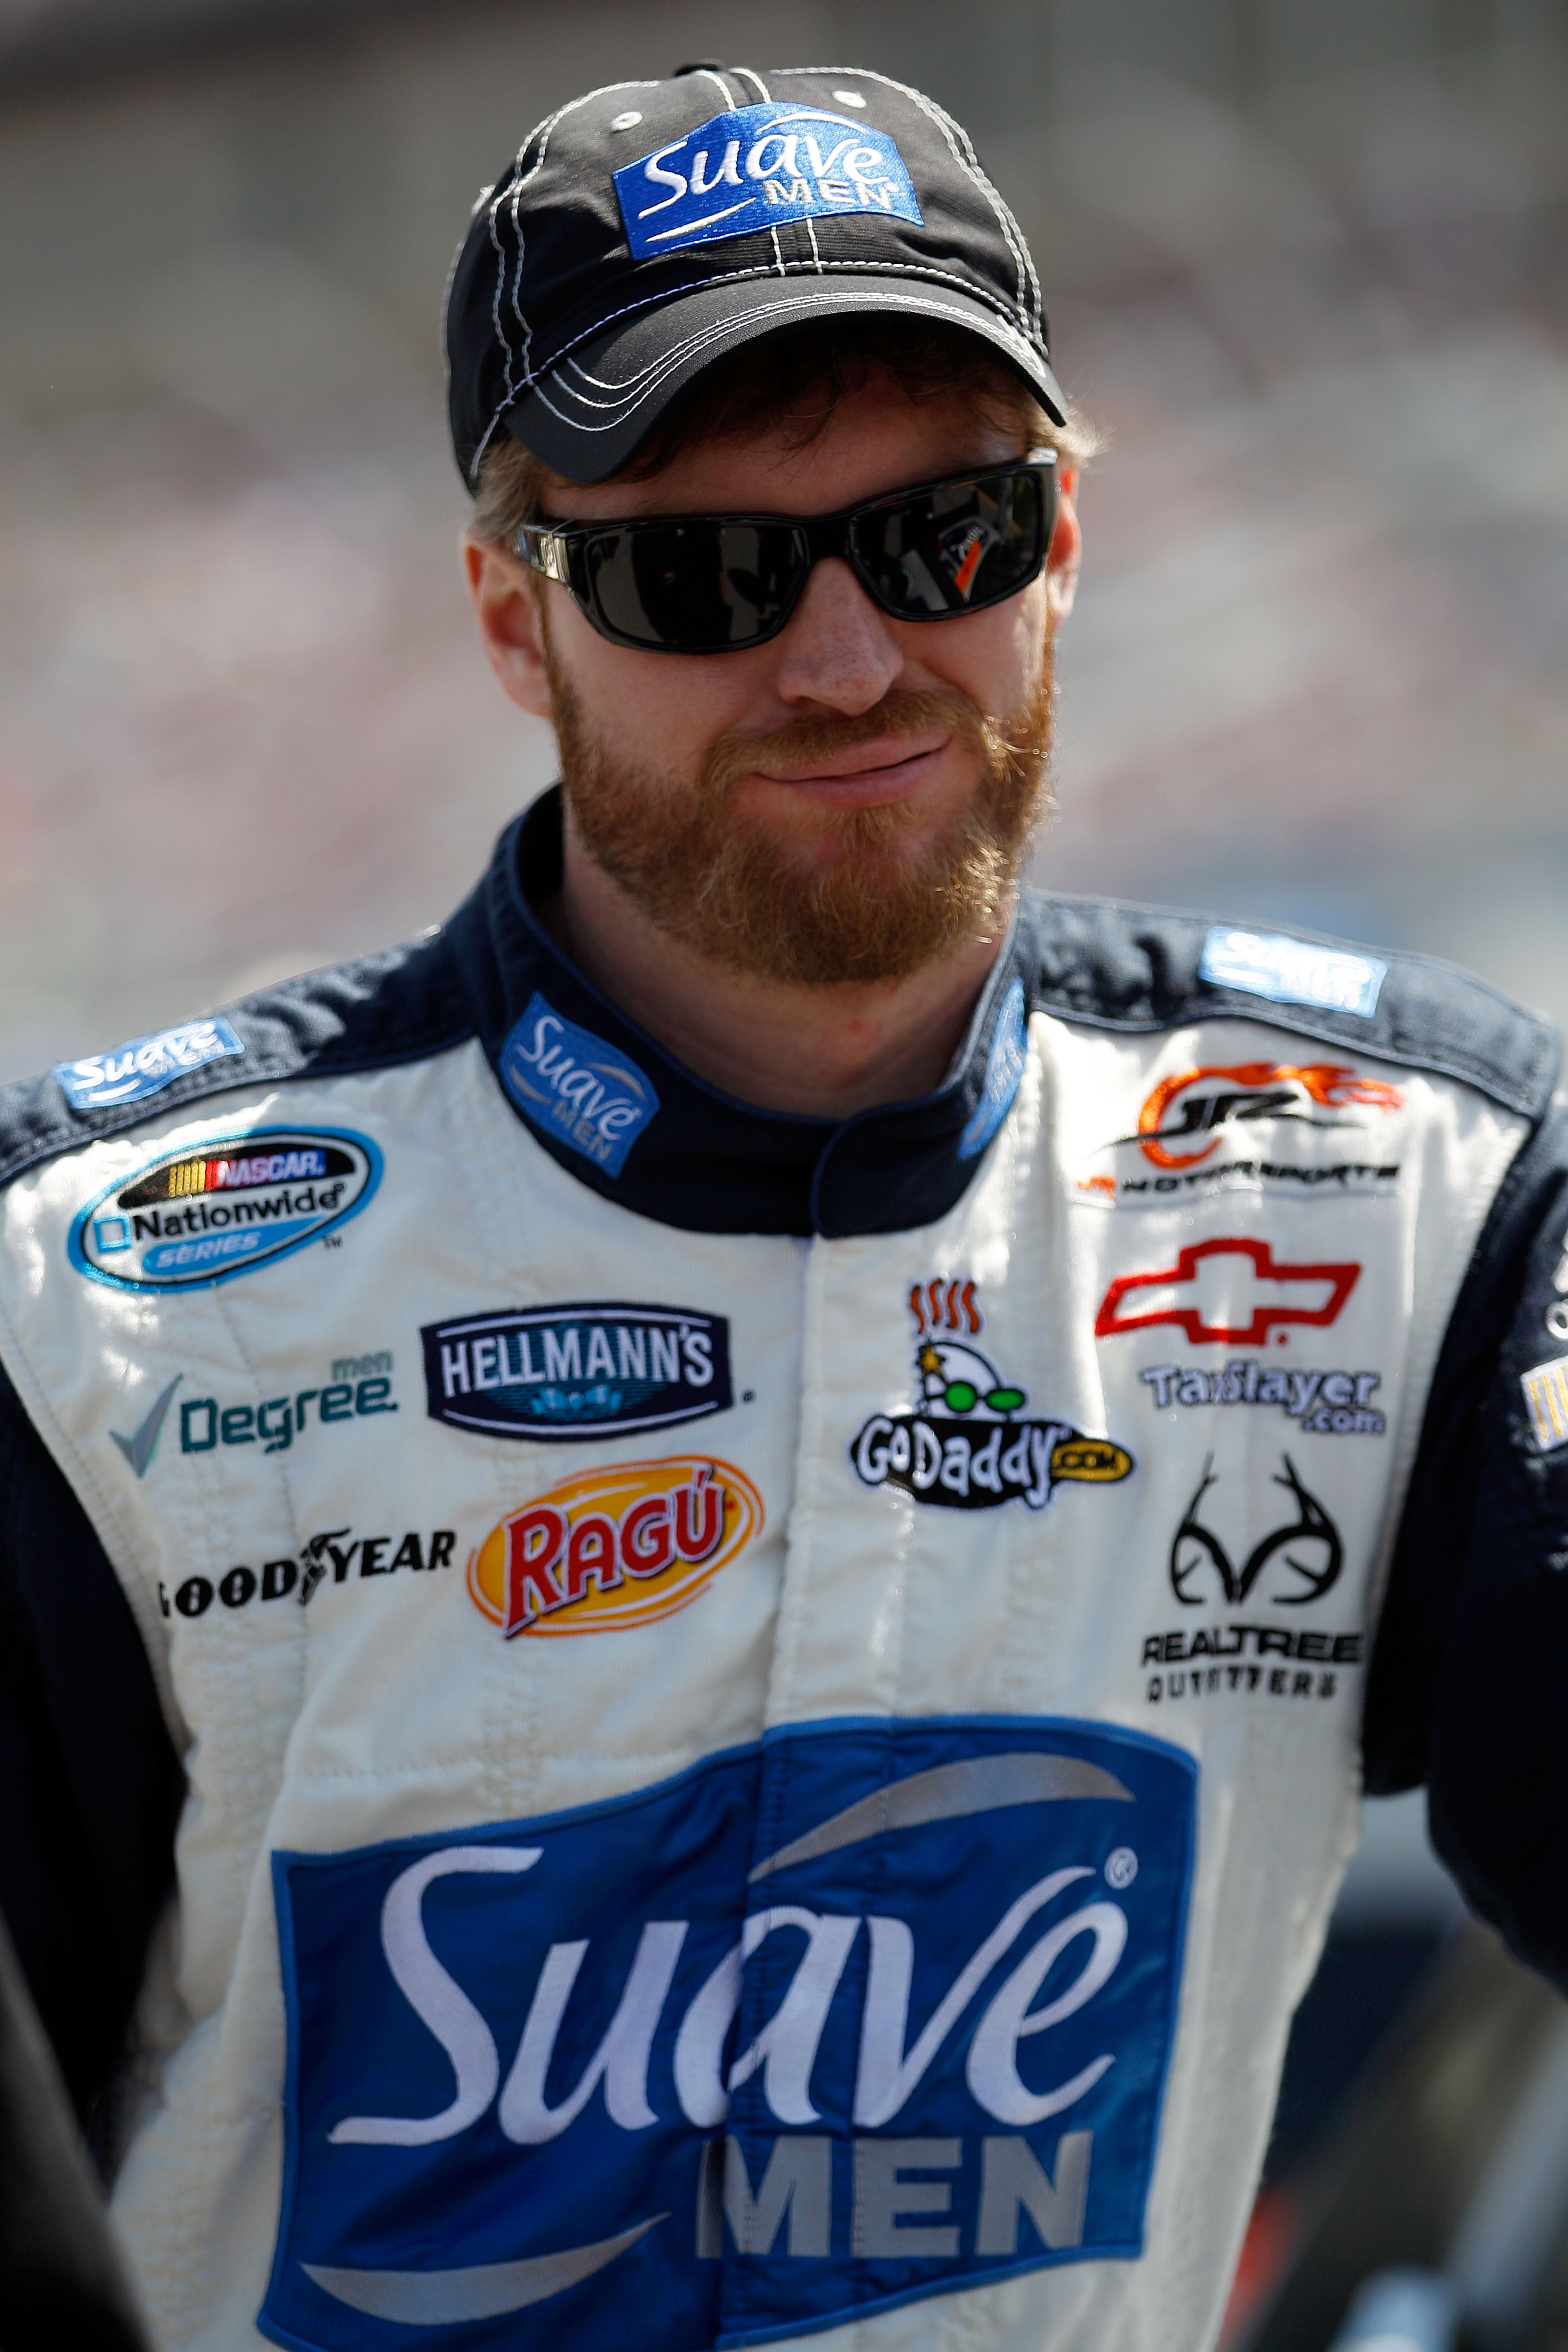 TALLADEGA, AL - APRIL 16:  Dale Earnhardt Jr., driver of the #7 Suave Men Chevrolet, stands on the grid prior to the start of the NASCAR Nationwide Series Aaron's 312 at Talladega Superspeedway on April 16, 2011 in Talladega, Alabama.  (Photo by Chris Gra